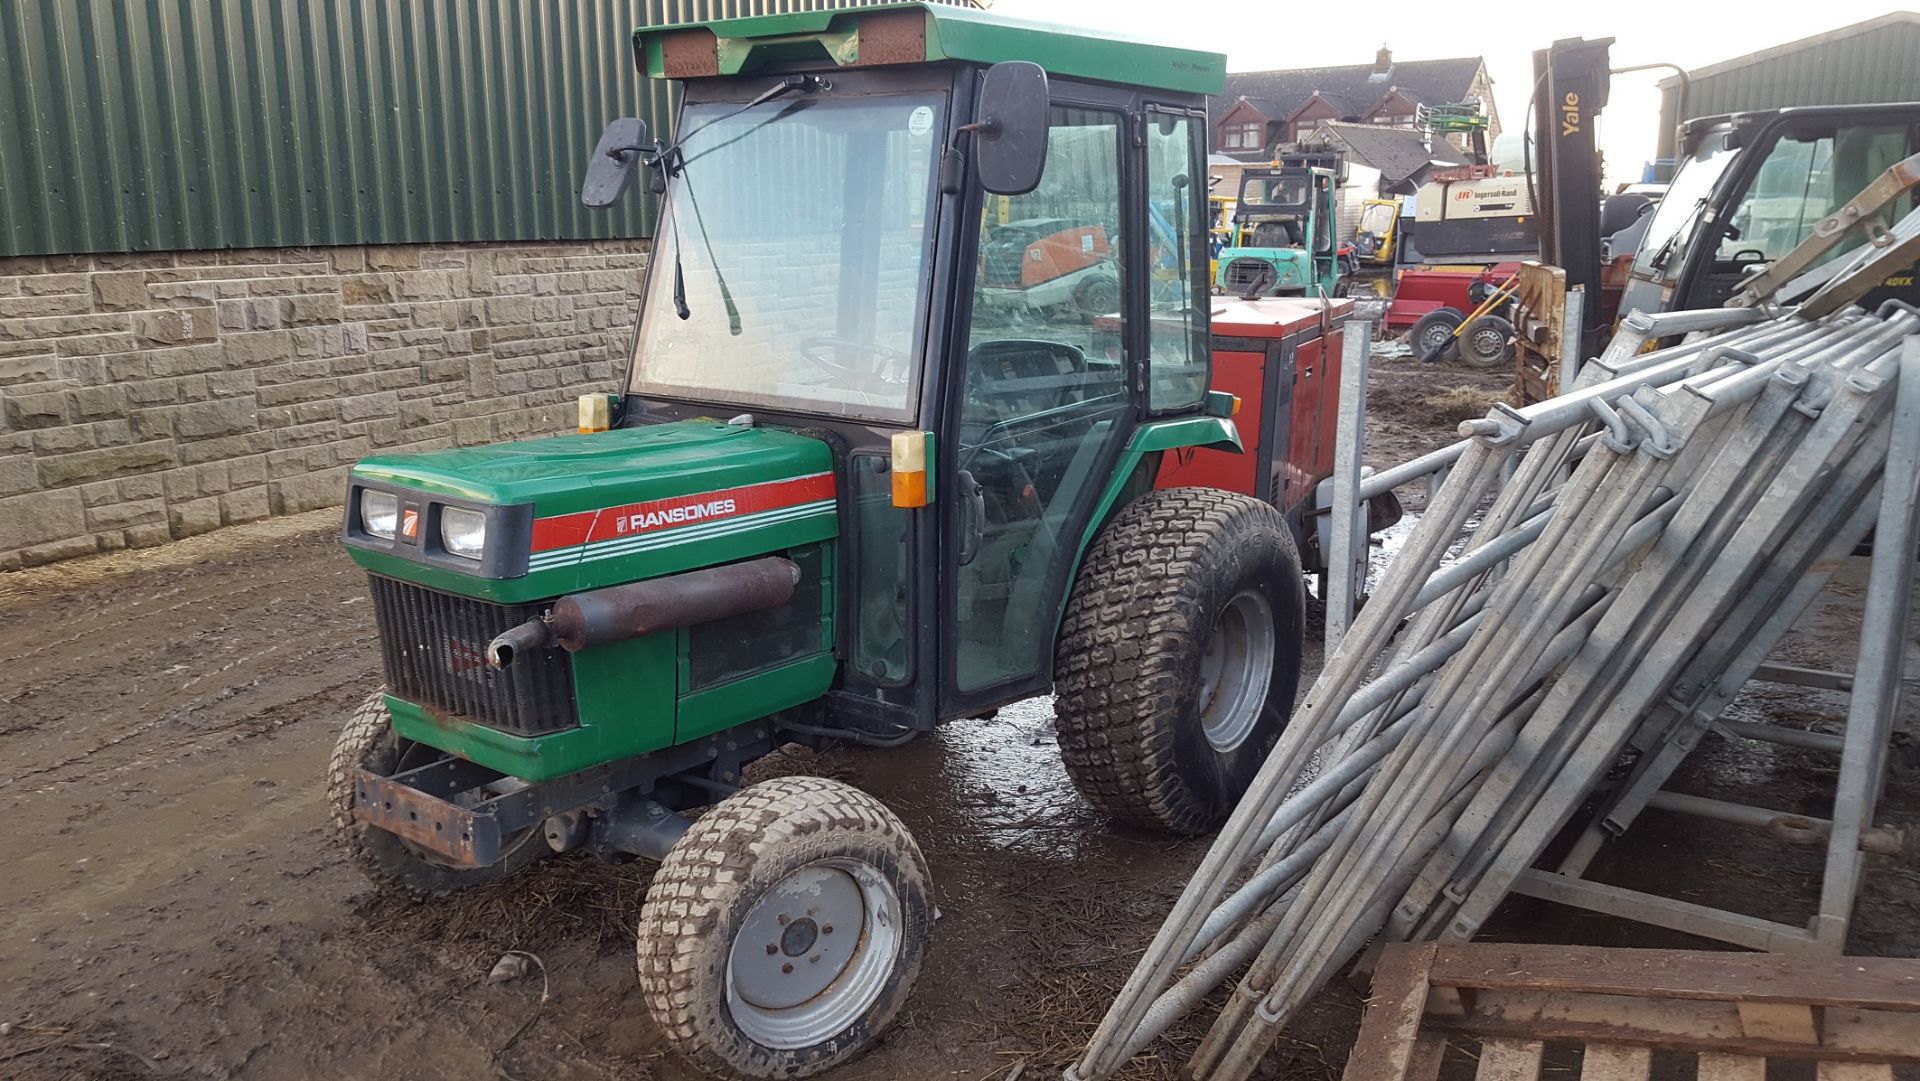 RANSOMES CT325 COMPACT TRACTOR, 25HP, 3 CYLINDER DIESEL ENGINE, CAB, TURF TYRES ,SPOOL VALVES - Image 2 of 6